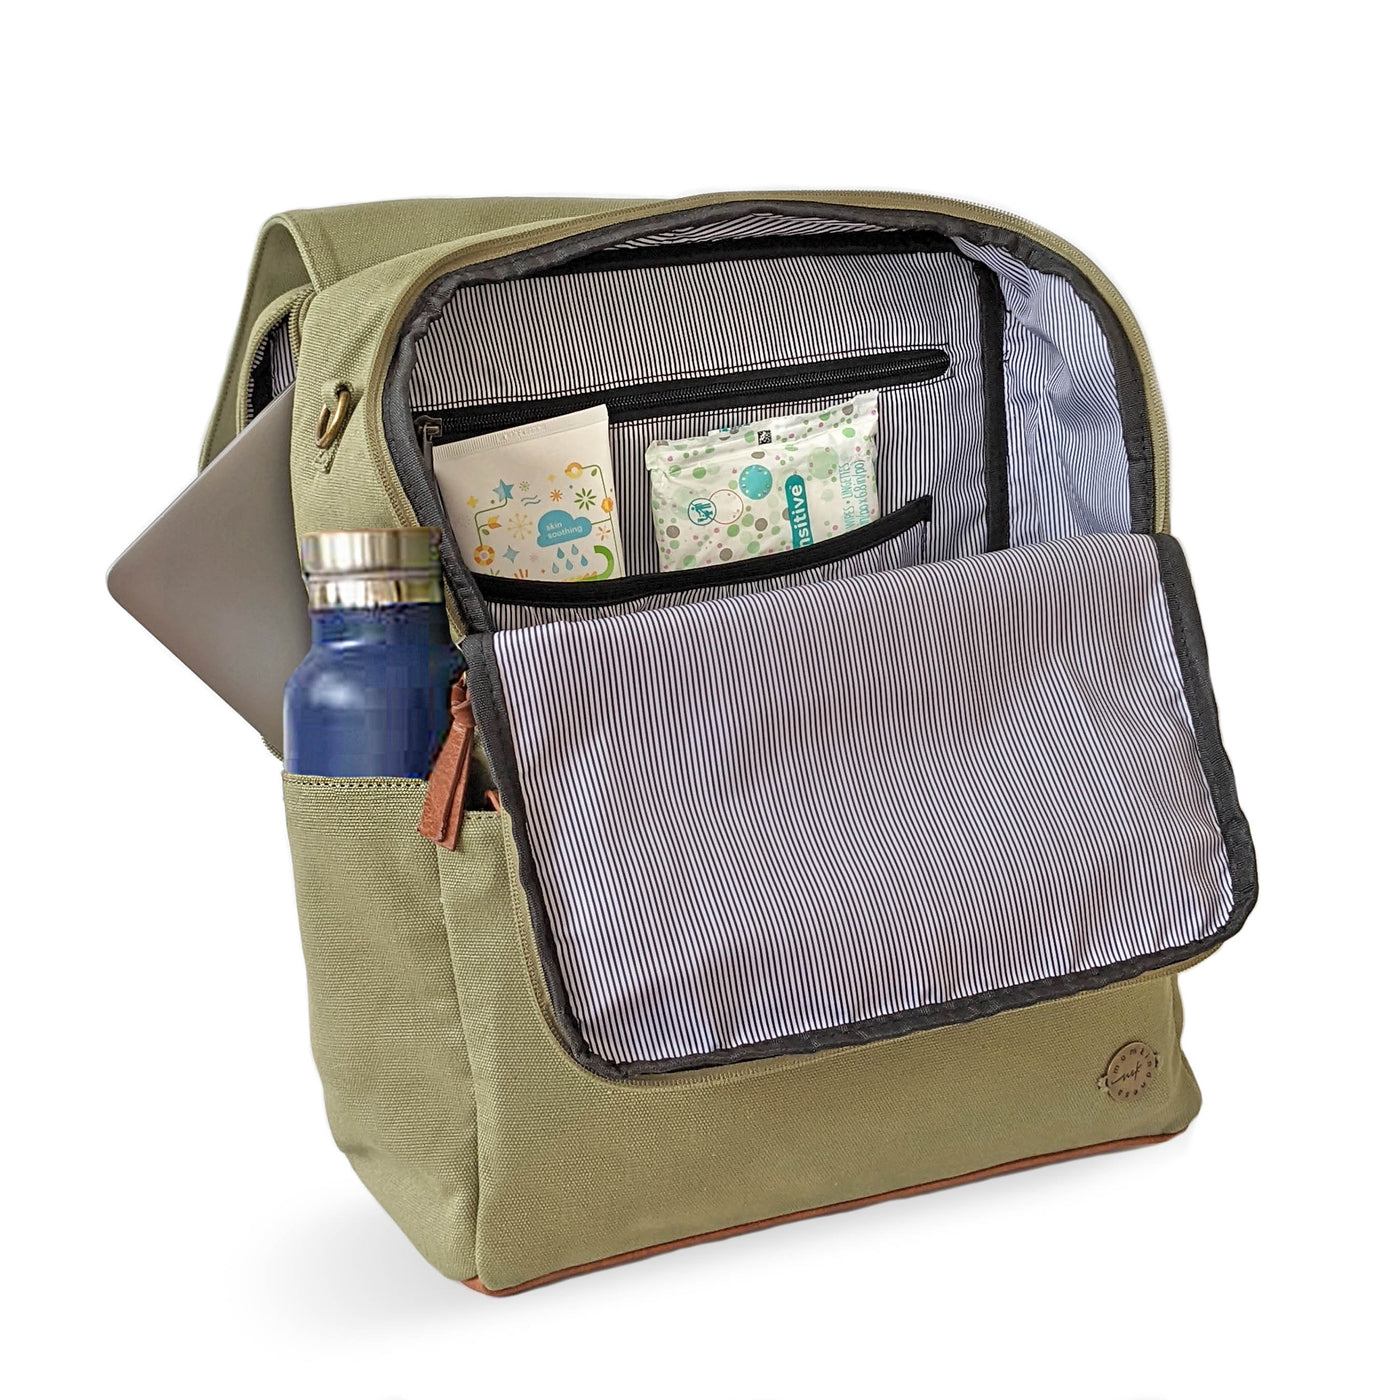 A laurel green colored canvas backpack with caramel brown vegan leather accents, shown in 3/4 front view with the main compartment open to reveal interior pockets and striped lining, also with a water bottle in side pocket.